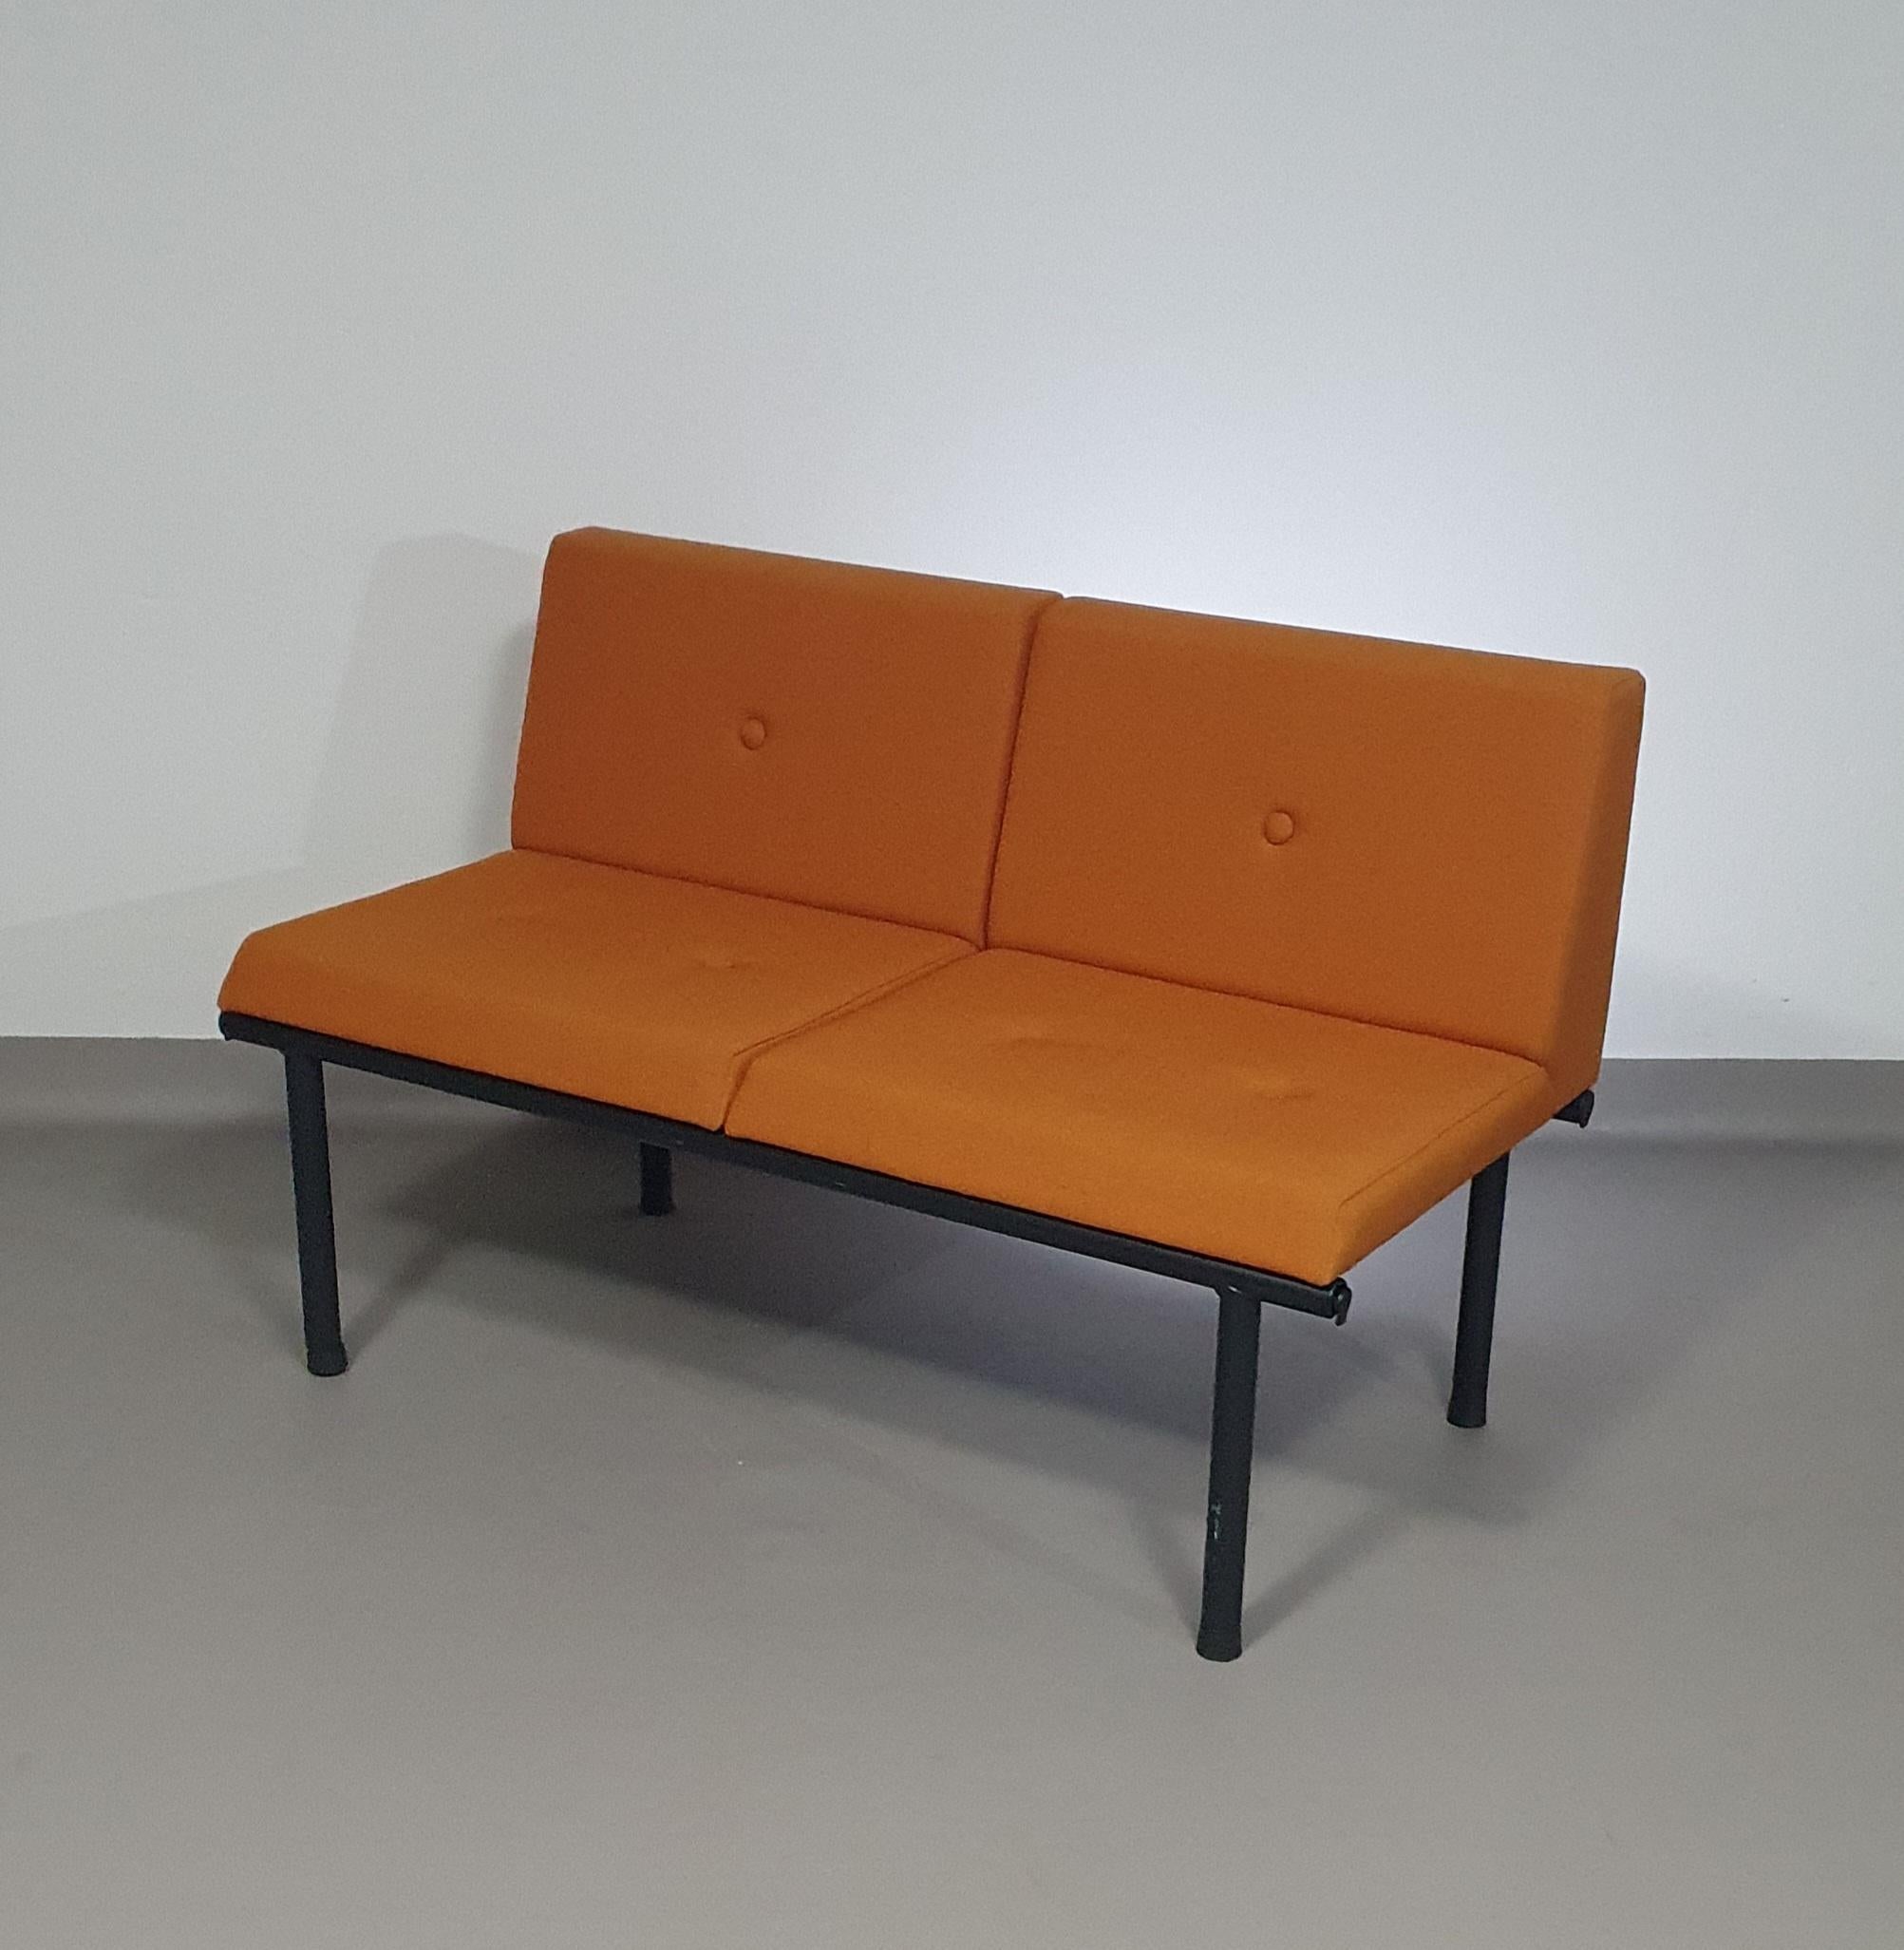 Bas Pruyser benches 2 x for Ahrend / De Cirkel 90s /
width 120 cm Total ( 2 benches ) width 240 cm
height 76 cm
depth 60 cm
Seat height 44 cm